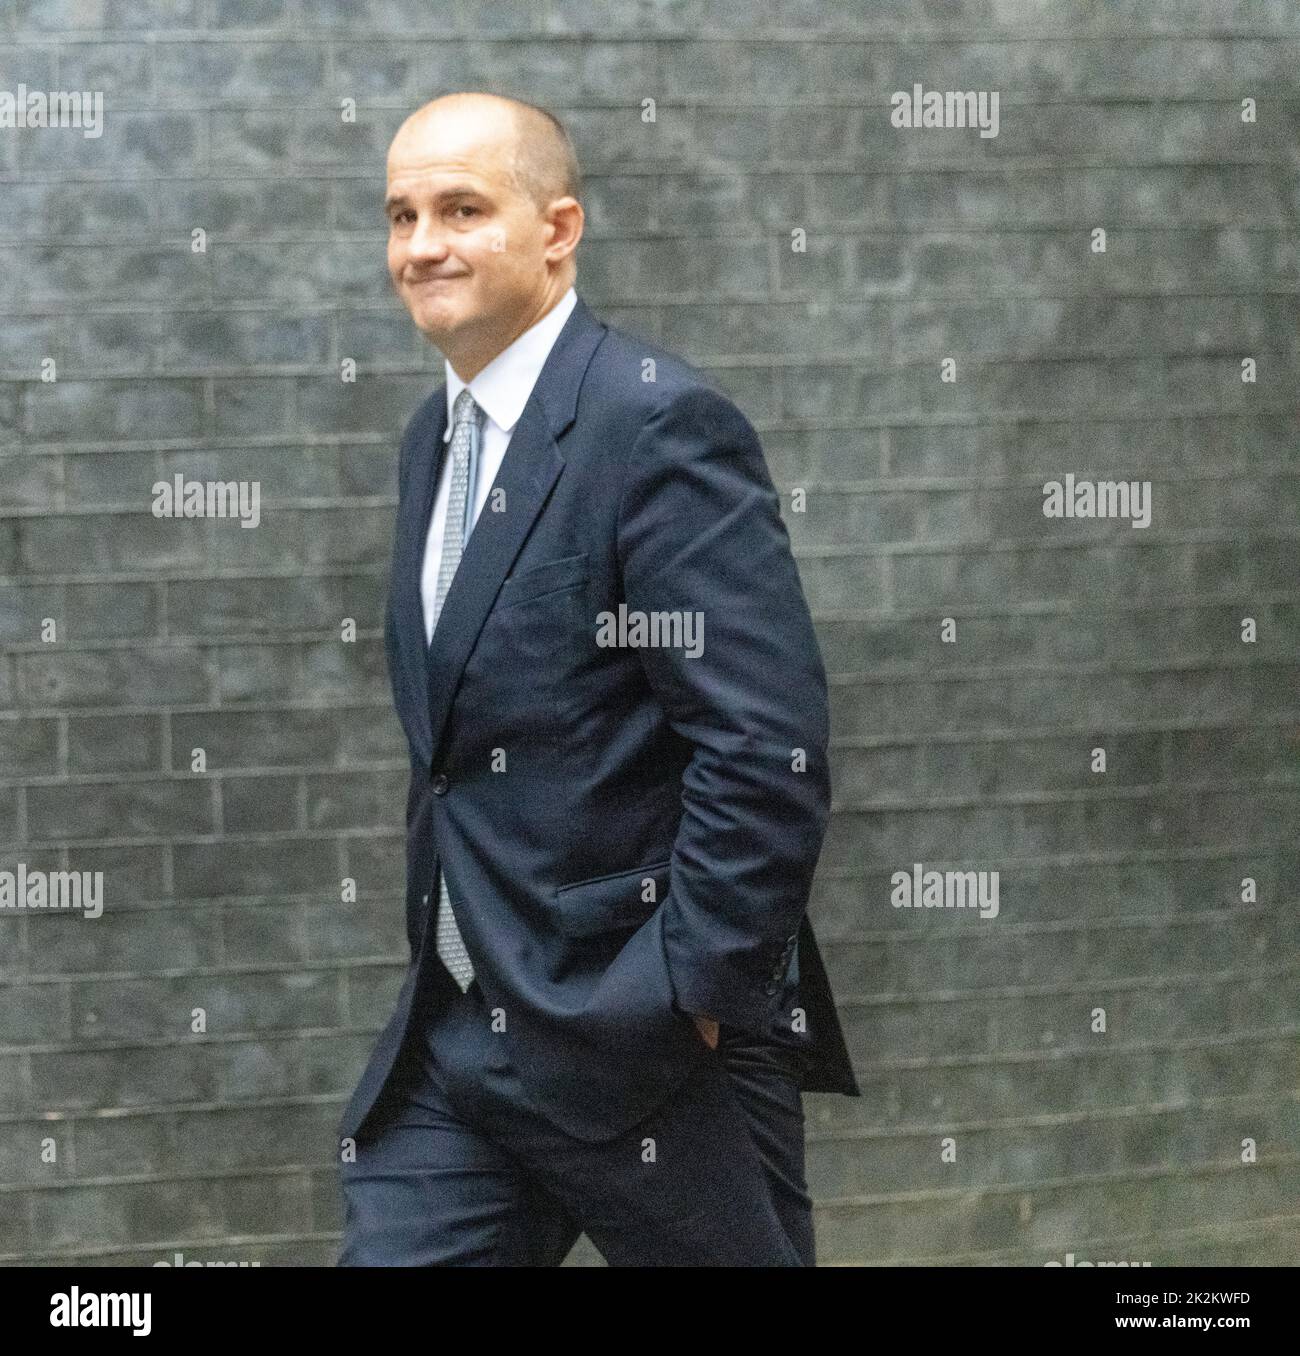 London, UK. 23rd Sep, 2022. Jake Berry, Minister without Portfolio, arrives at a cabinet meeting at 10 Downing Street London. Credit: Ian Davidson/Alamy Live News Stock Photo